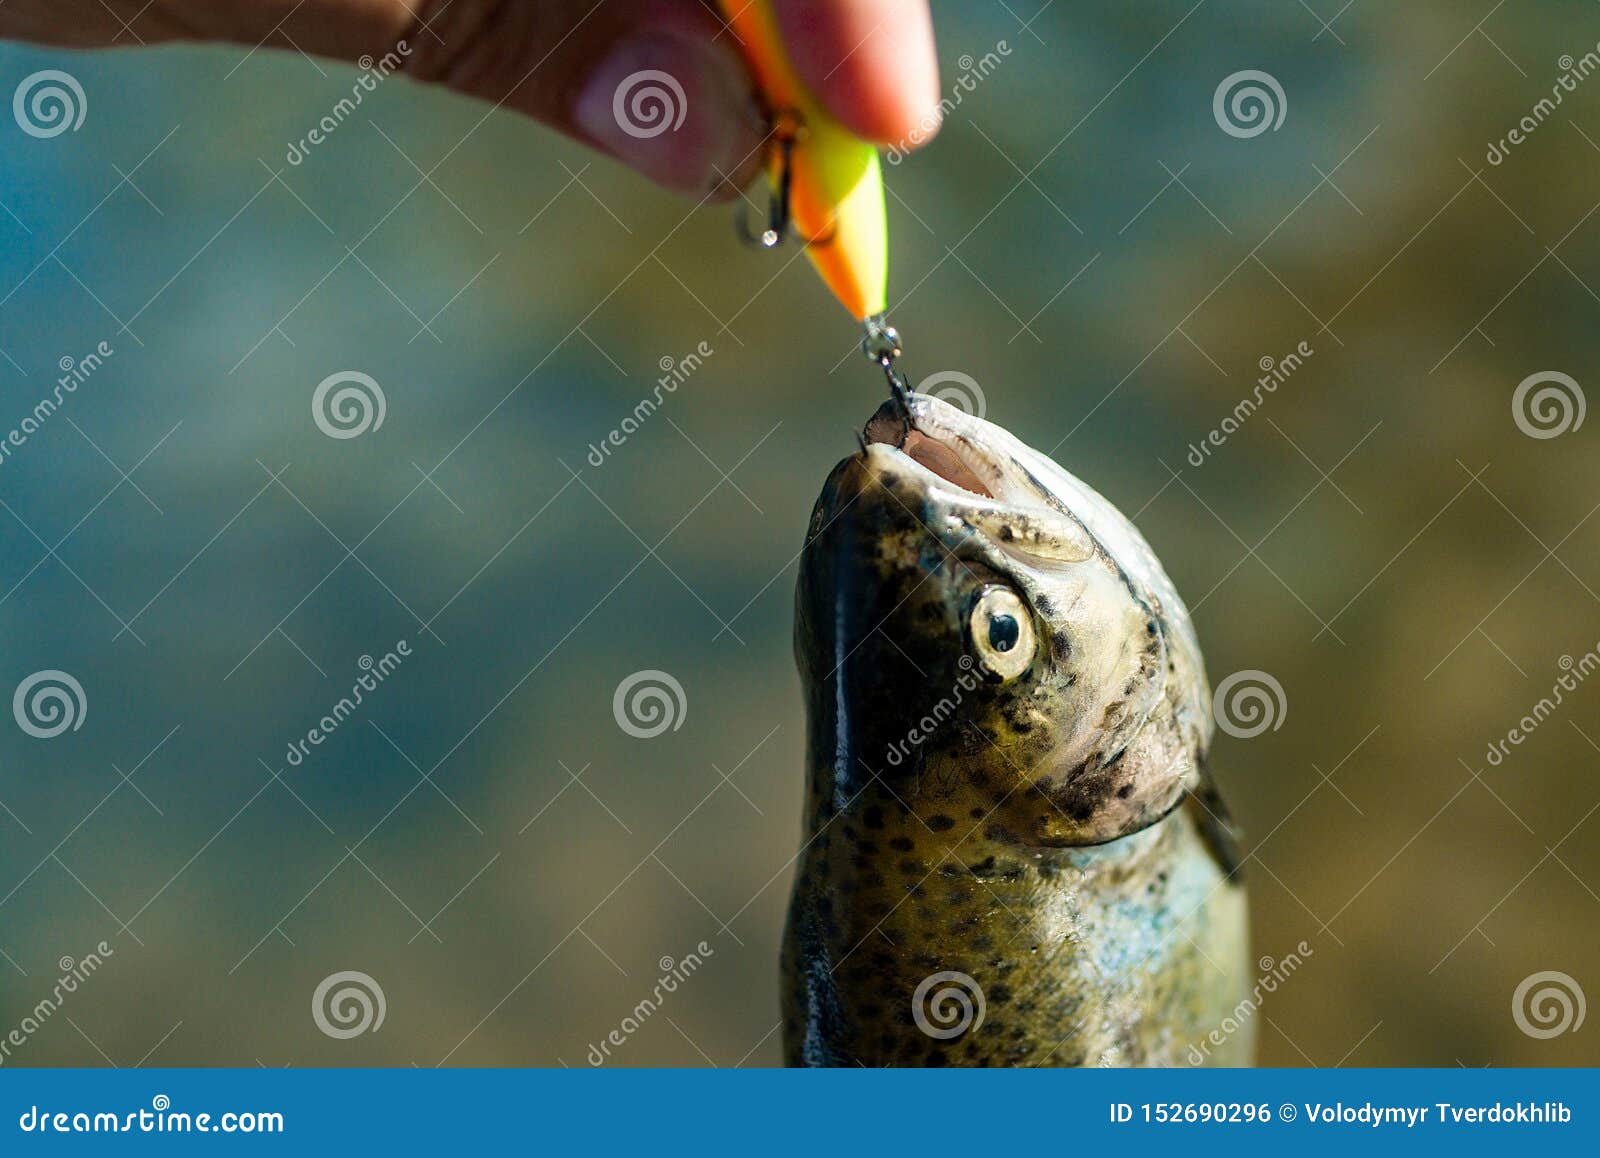 Catching a Big Fish with a Fishing Pole. Trout. Fishing. Steelhead Rainbow  Trout. Catches a Fish Stock Photo - Image of mouth, float: 152690296